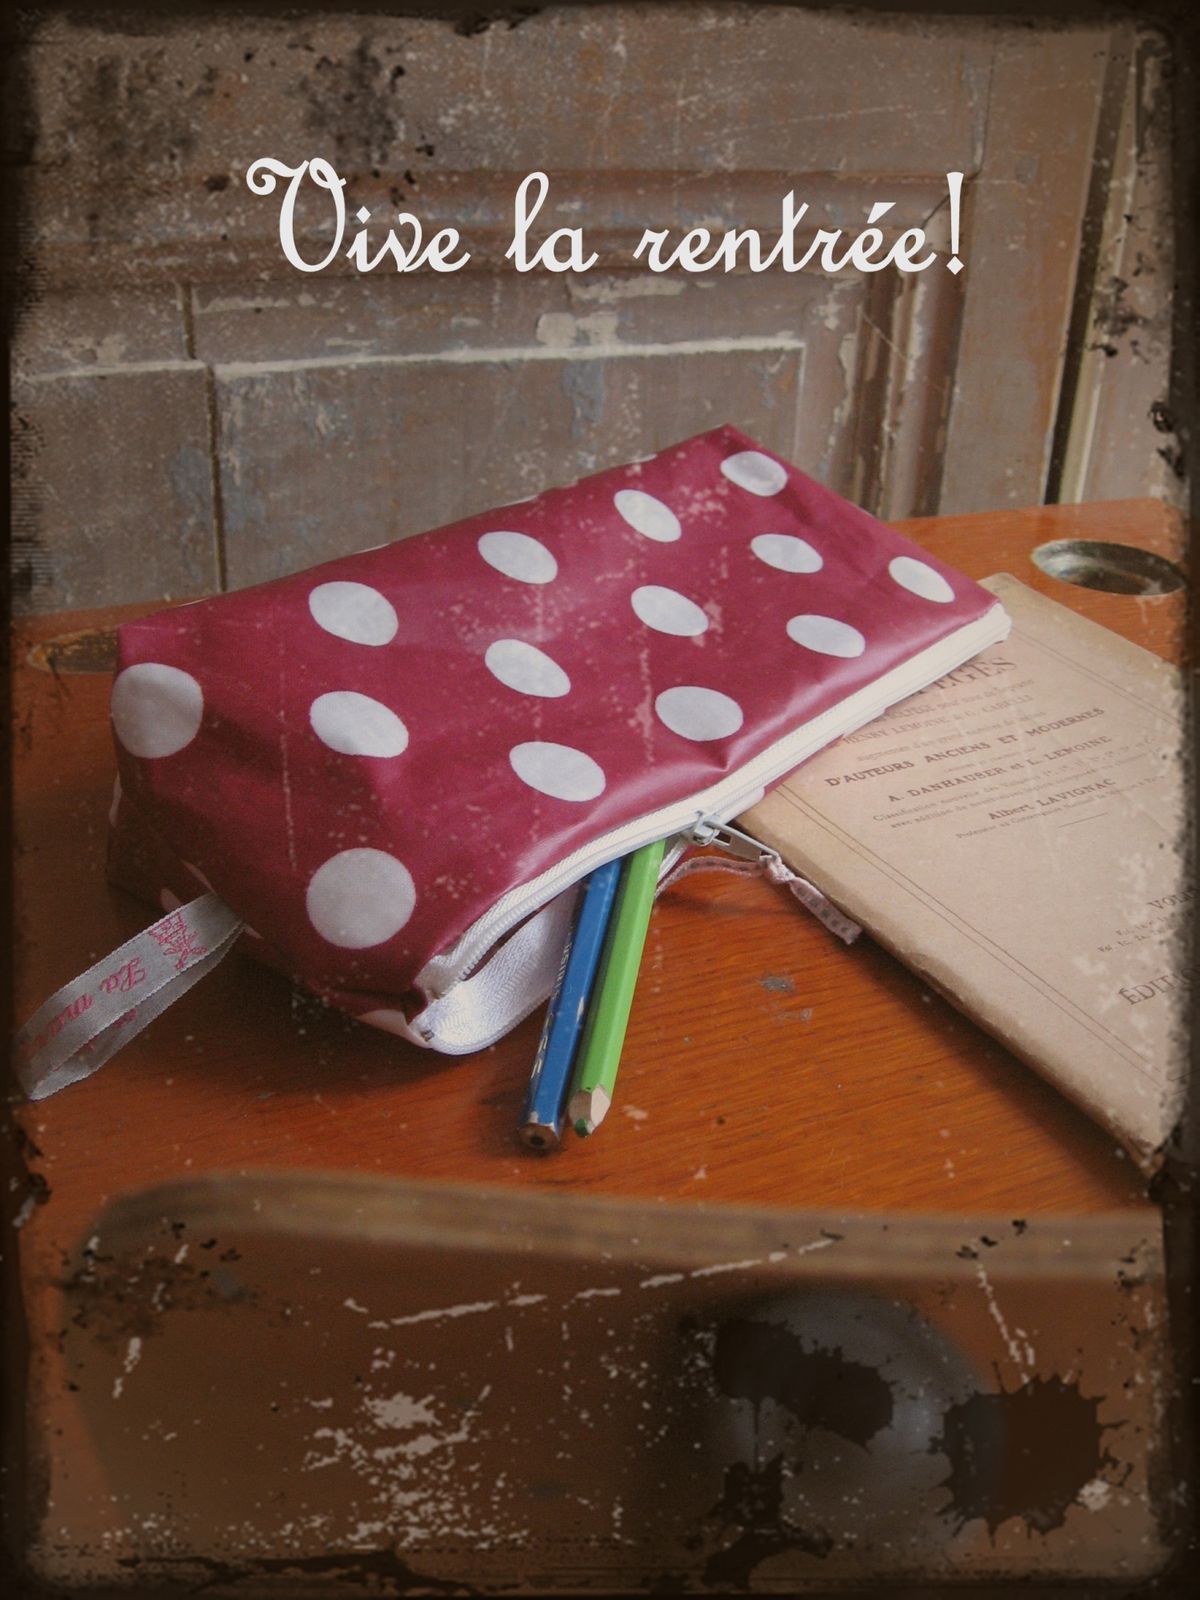 http://a7.idata.over-blog.com/1/86/87/98/mes-images/trousse-rentree-1.jpg